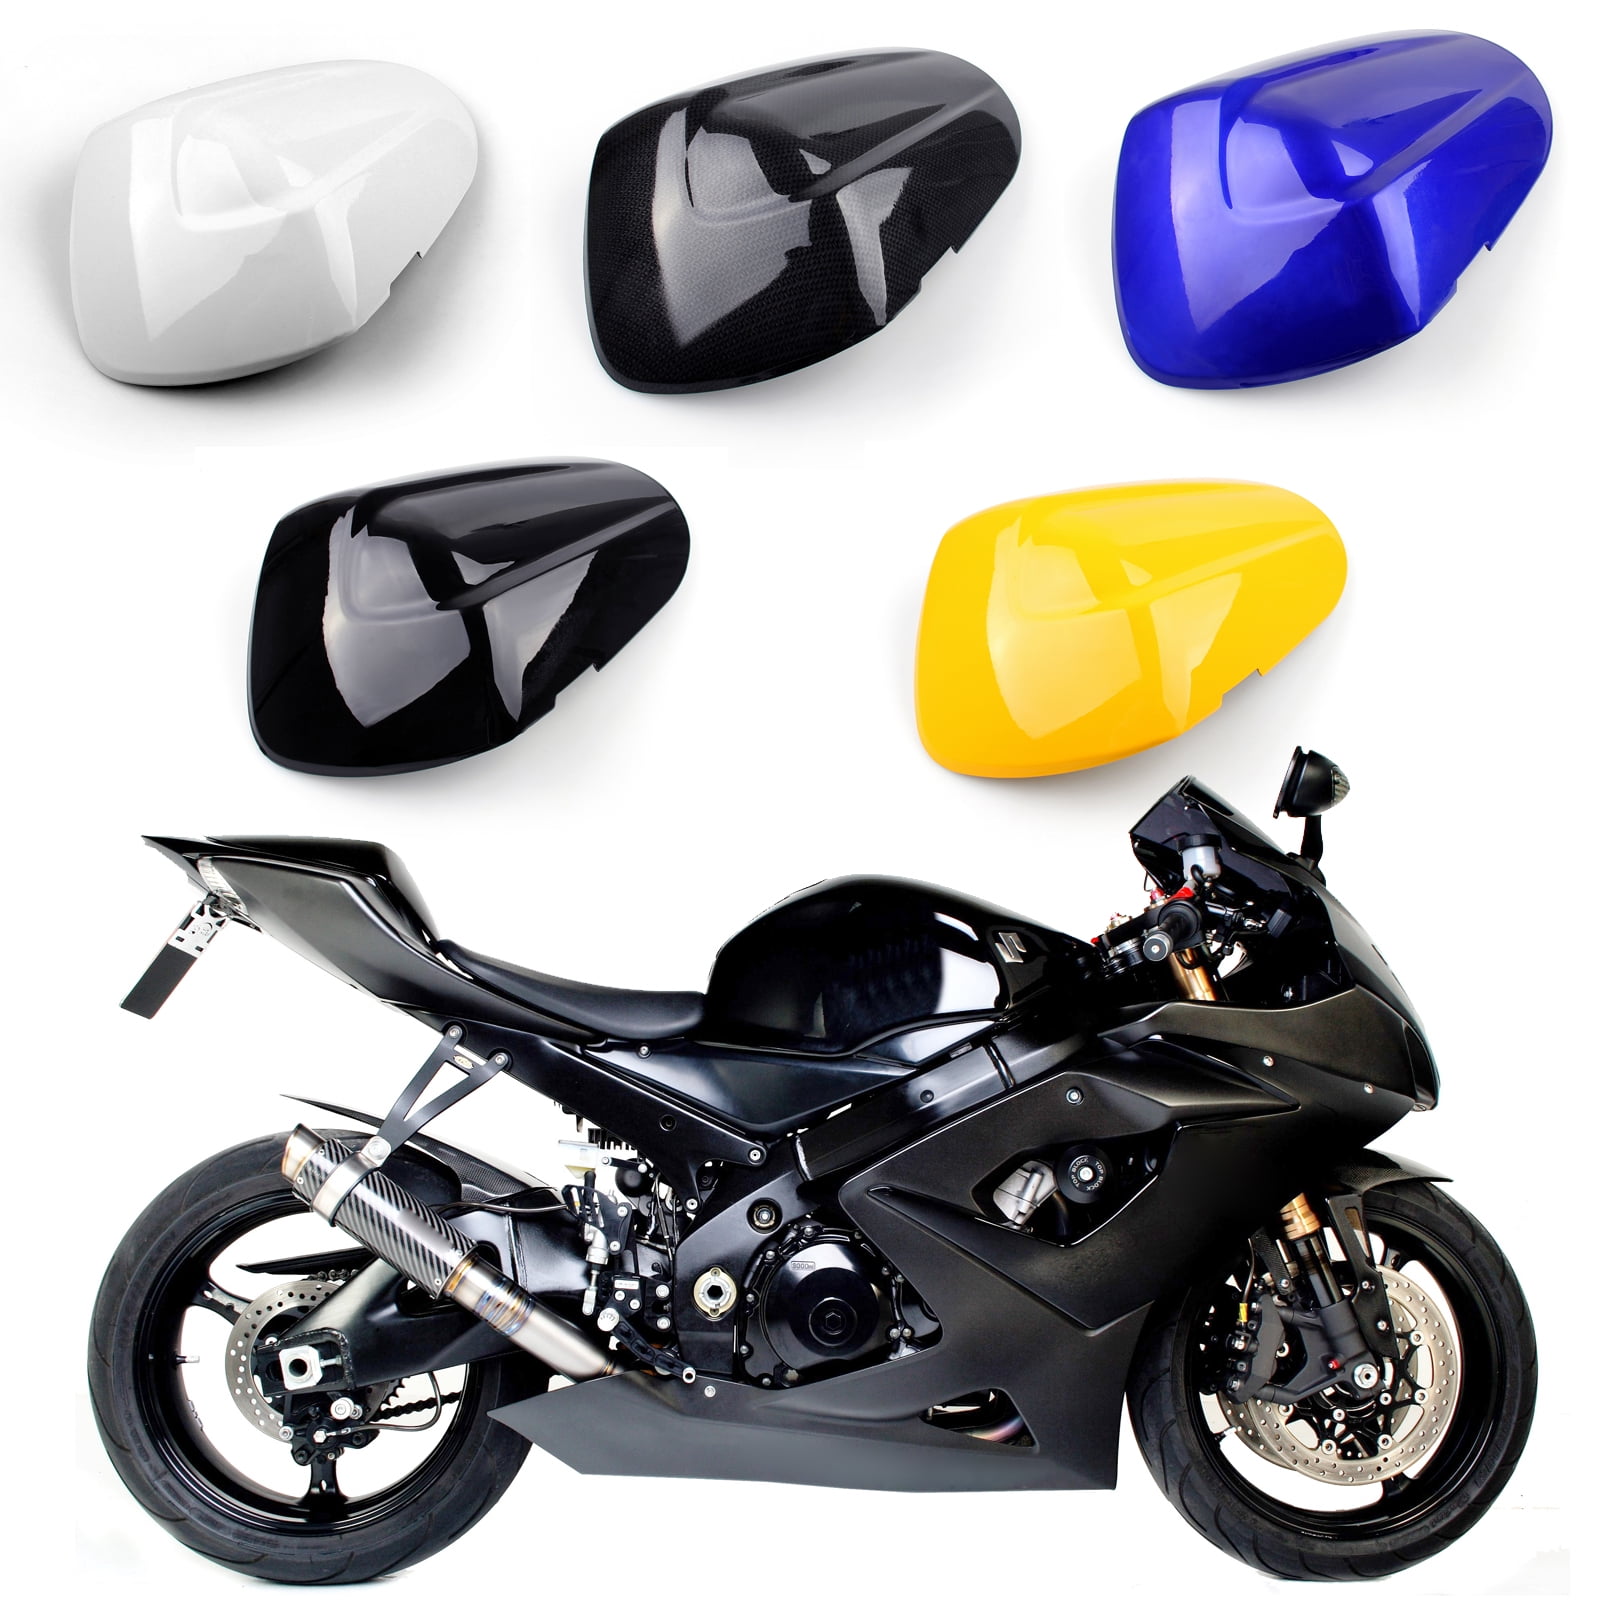 Artudatech Motorbike Rear Seat Cover Cowl Passenger Pillion Motorcycle Seat Cowl Fairing Tail Cover for H-O-N-D-A CBR300R CB300F 2014 2015 2016